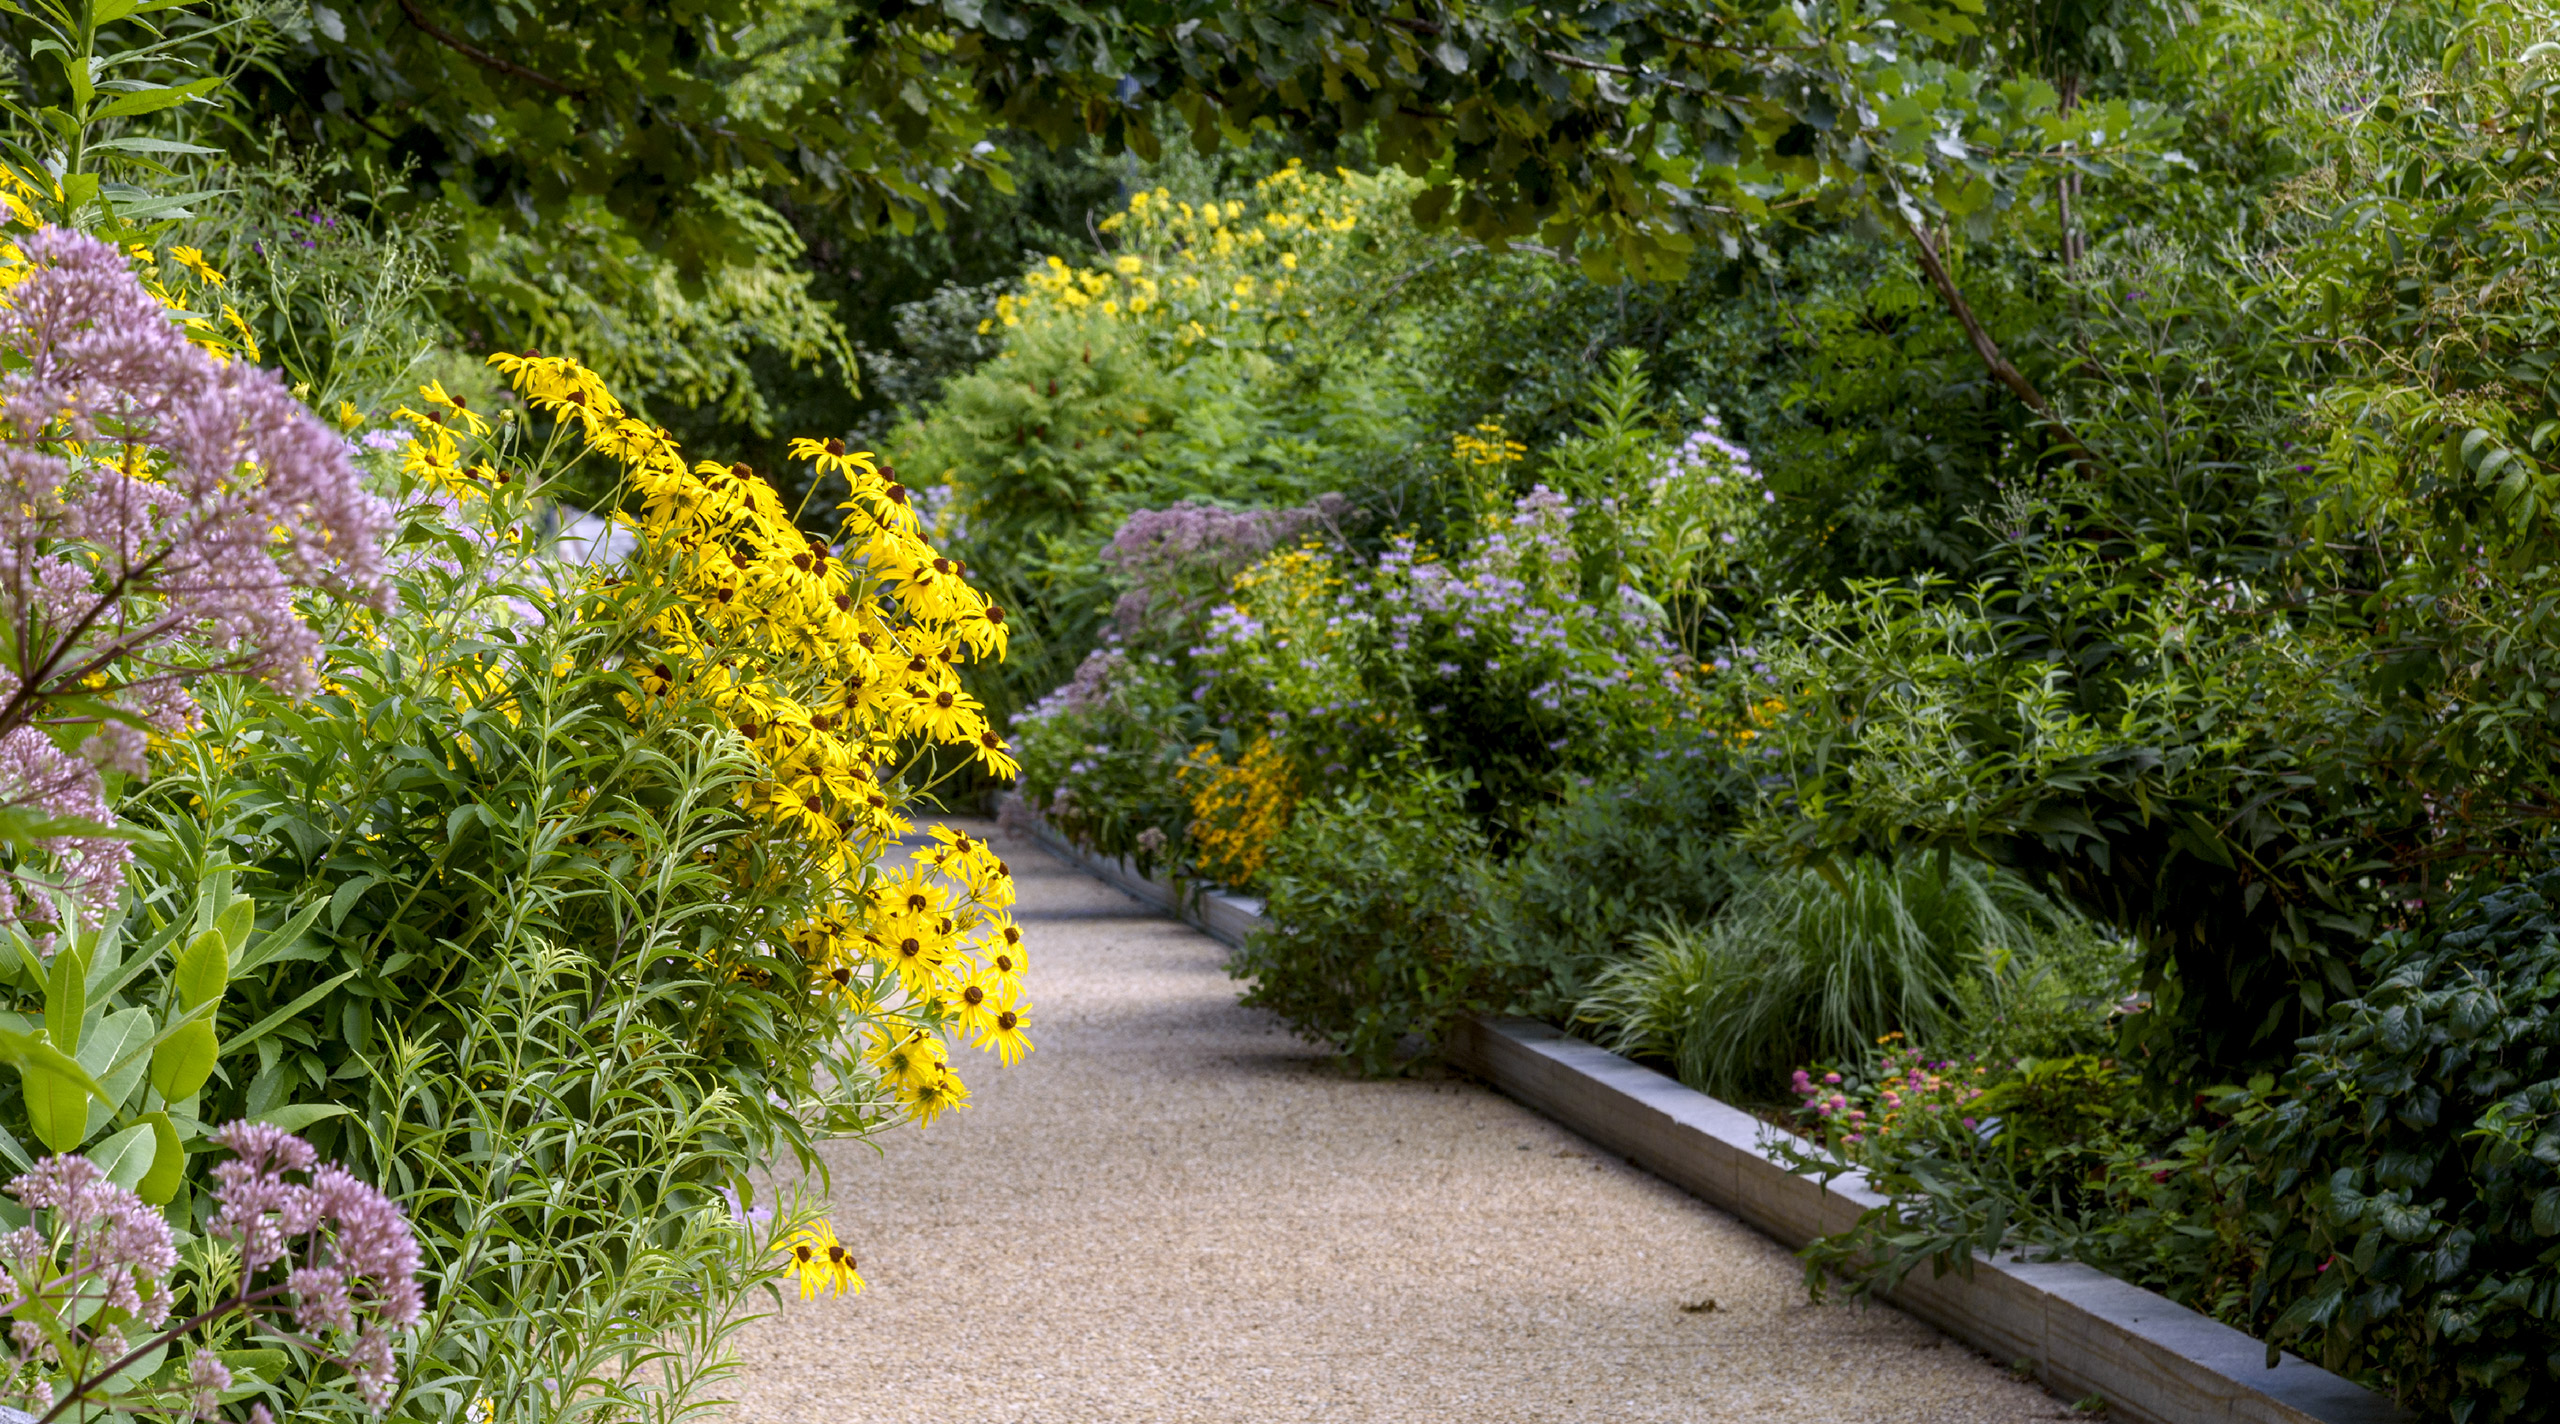 Path through Pollinator Garden framed by purple and yellow flowers